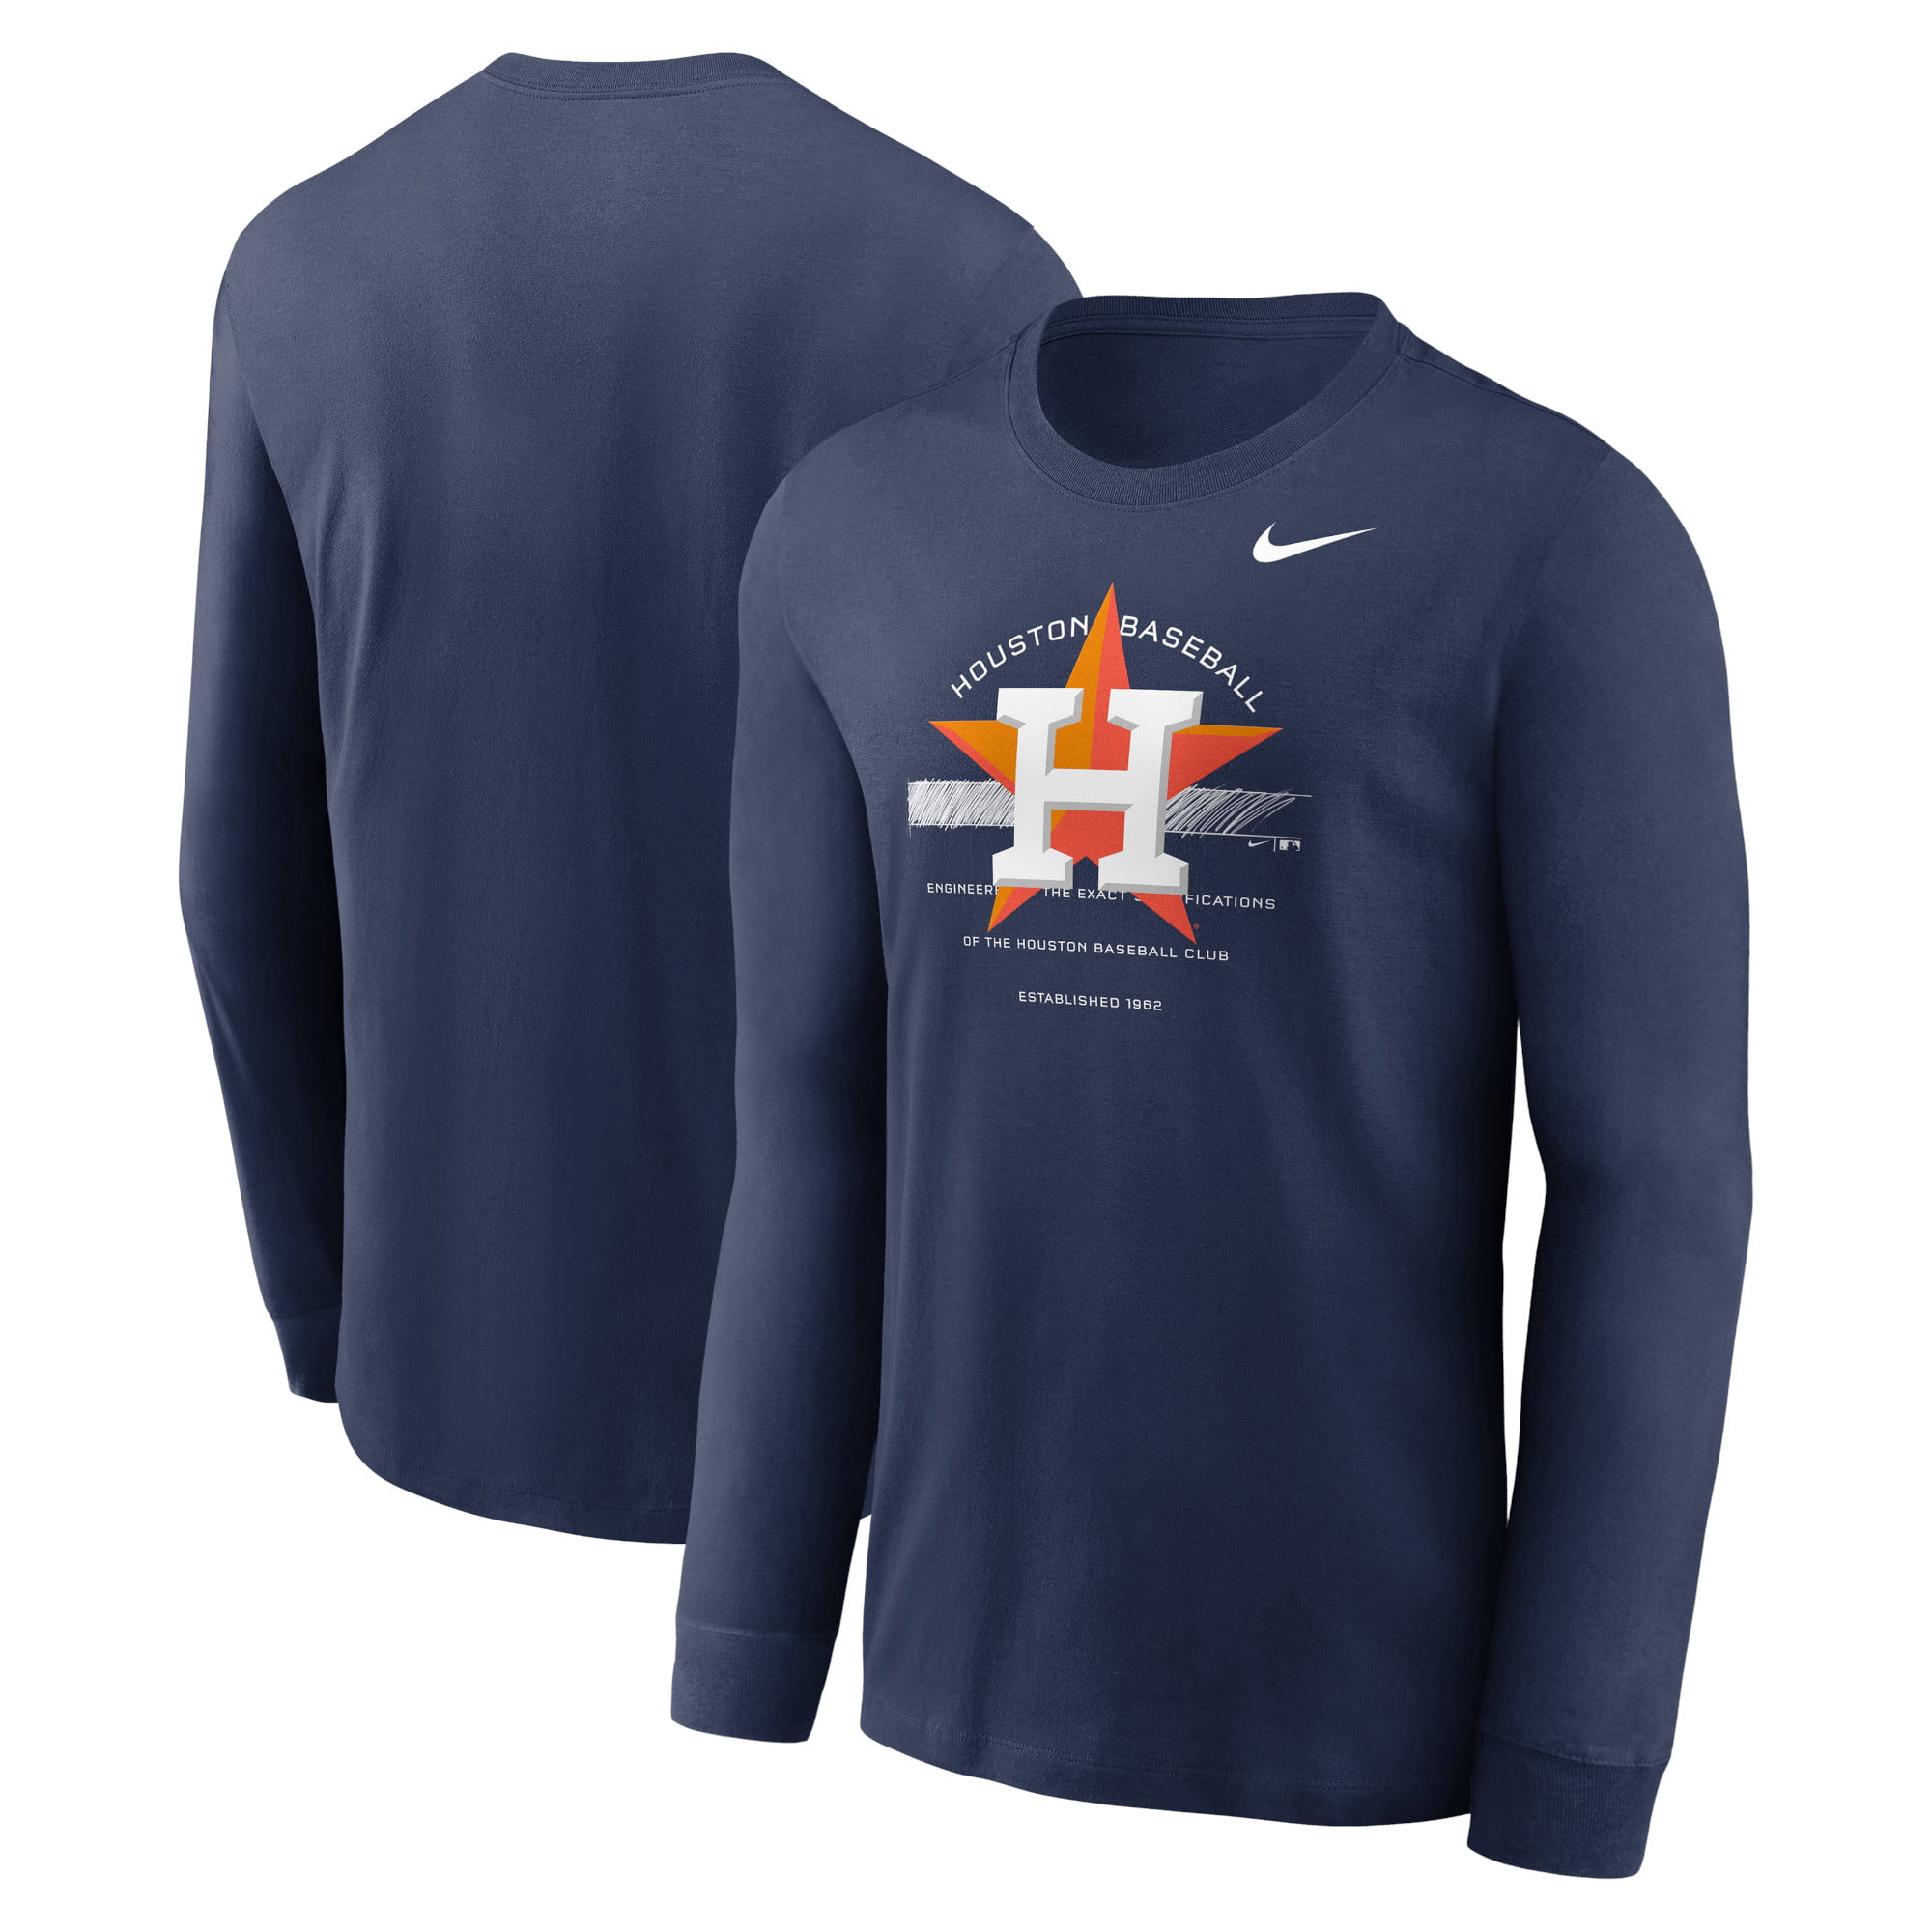 Men's Nike Navy Houston Astros Over Arch Performance Long Sleeve T